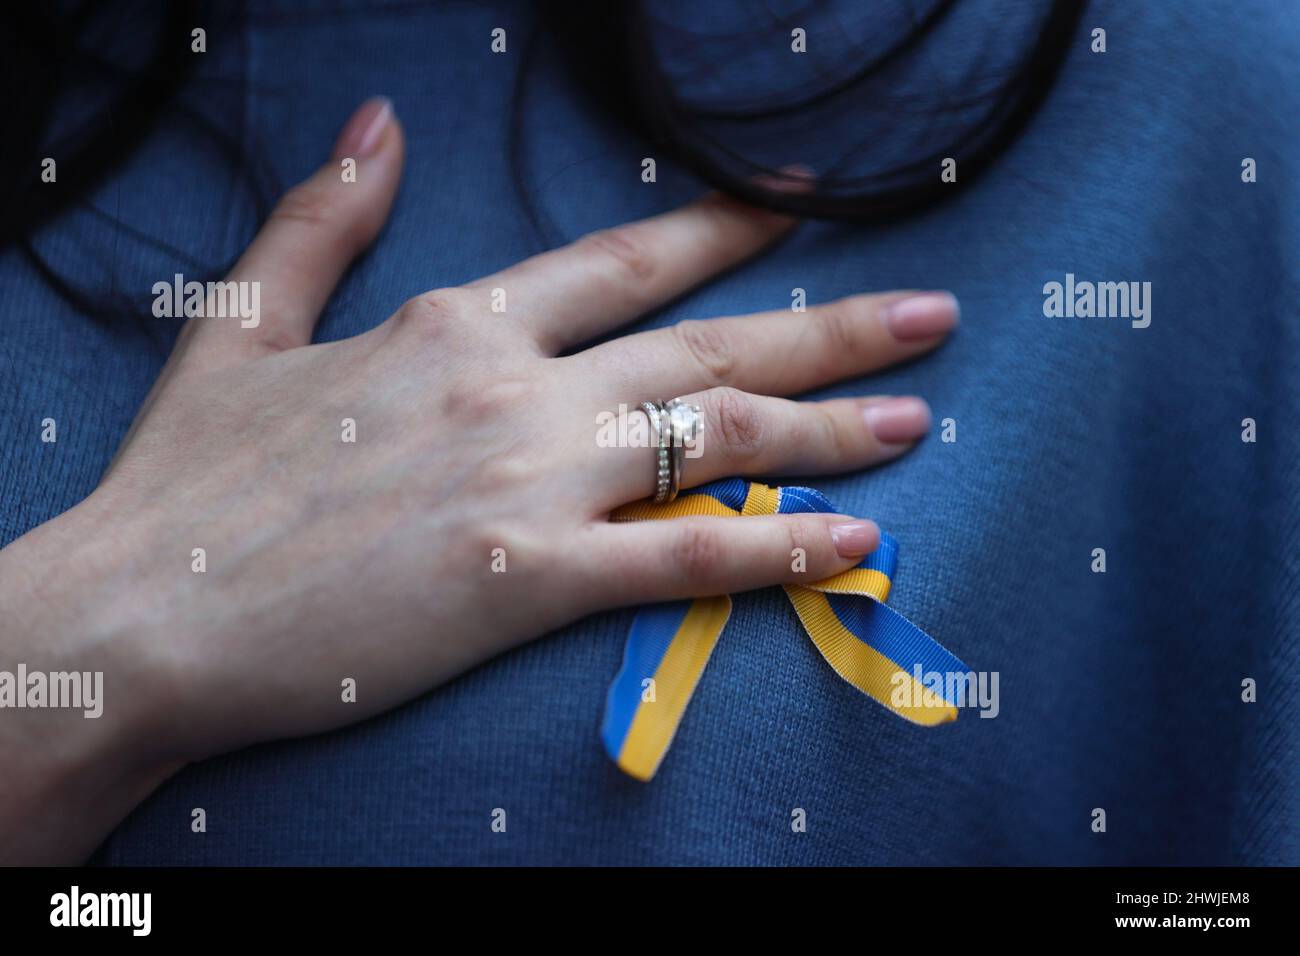 New Delhi, New Delhi, India. 6th Mar, 2022. A Ukrainian woman places her hand on her chest in solidarity with the people of Ukraine after Russia's invasion. (Credit Image: © Karma Sonam Bhutia/ZUMA Press Wire) Stock Photo